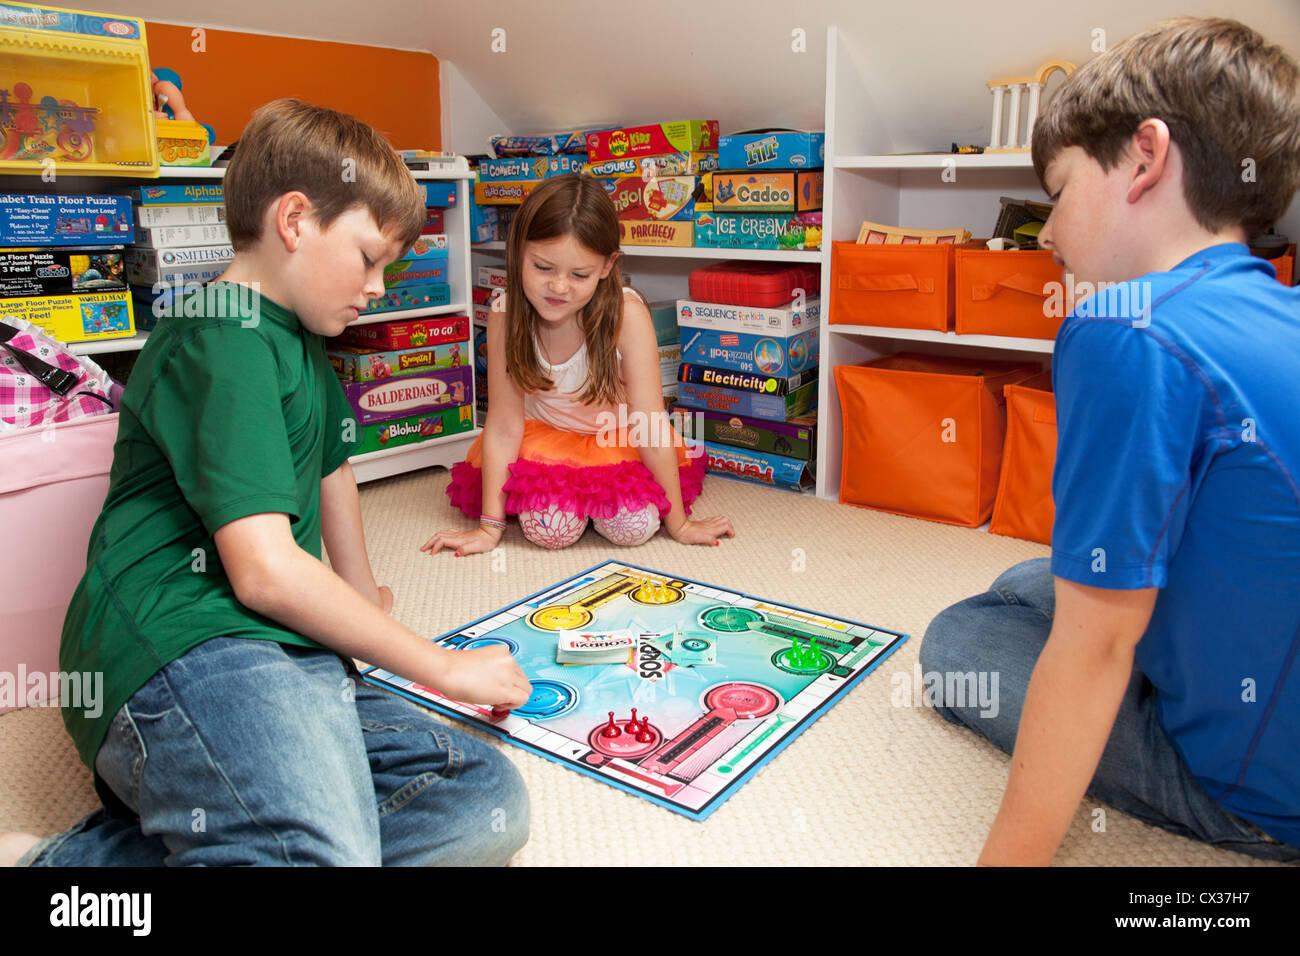 Three siblings are in their playroom playing a board game. Stock Photo